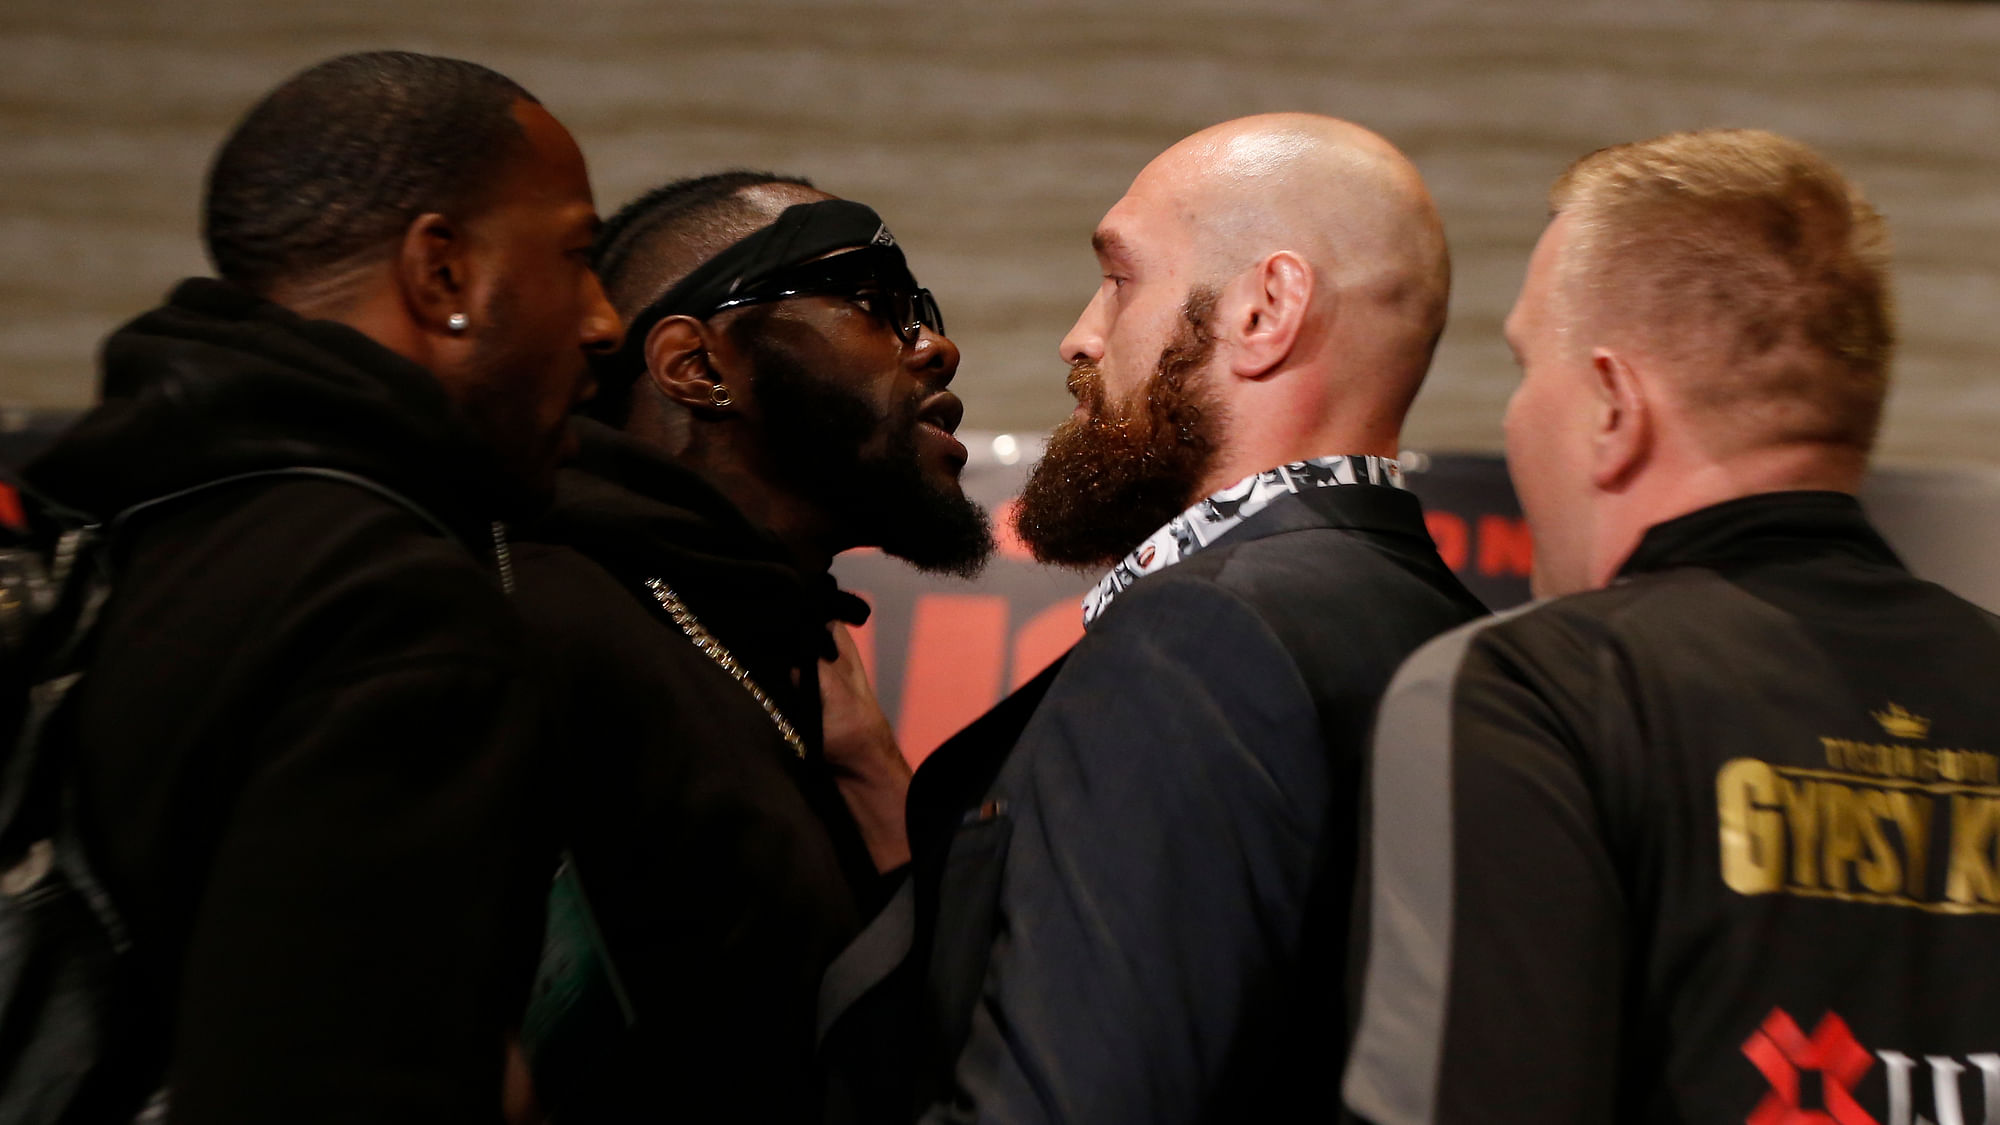 Boxers Deontay Wilder, second from left, and Tyson Fury, center, exchange words as they face each other at a news conference in Los Angeles, Wednesday, Nov. 28, 2018. The pair are slated to fight Saturday night for Wilder’s WBC heavyweight title.&nbsp;